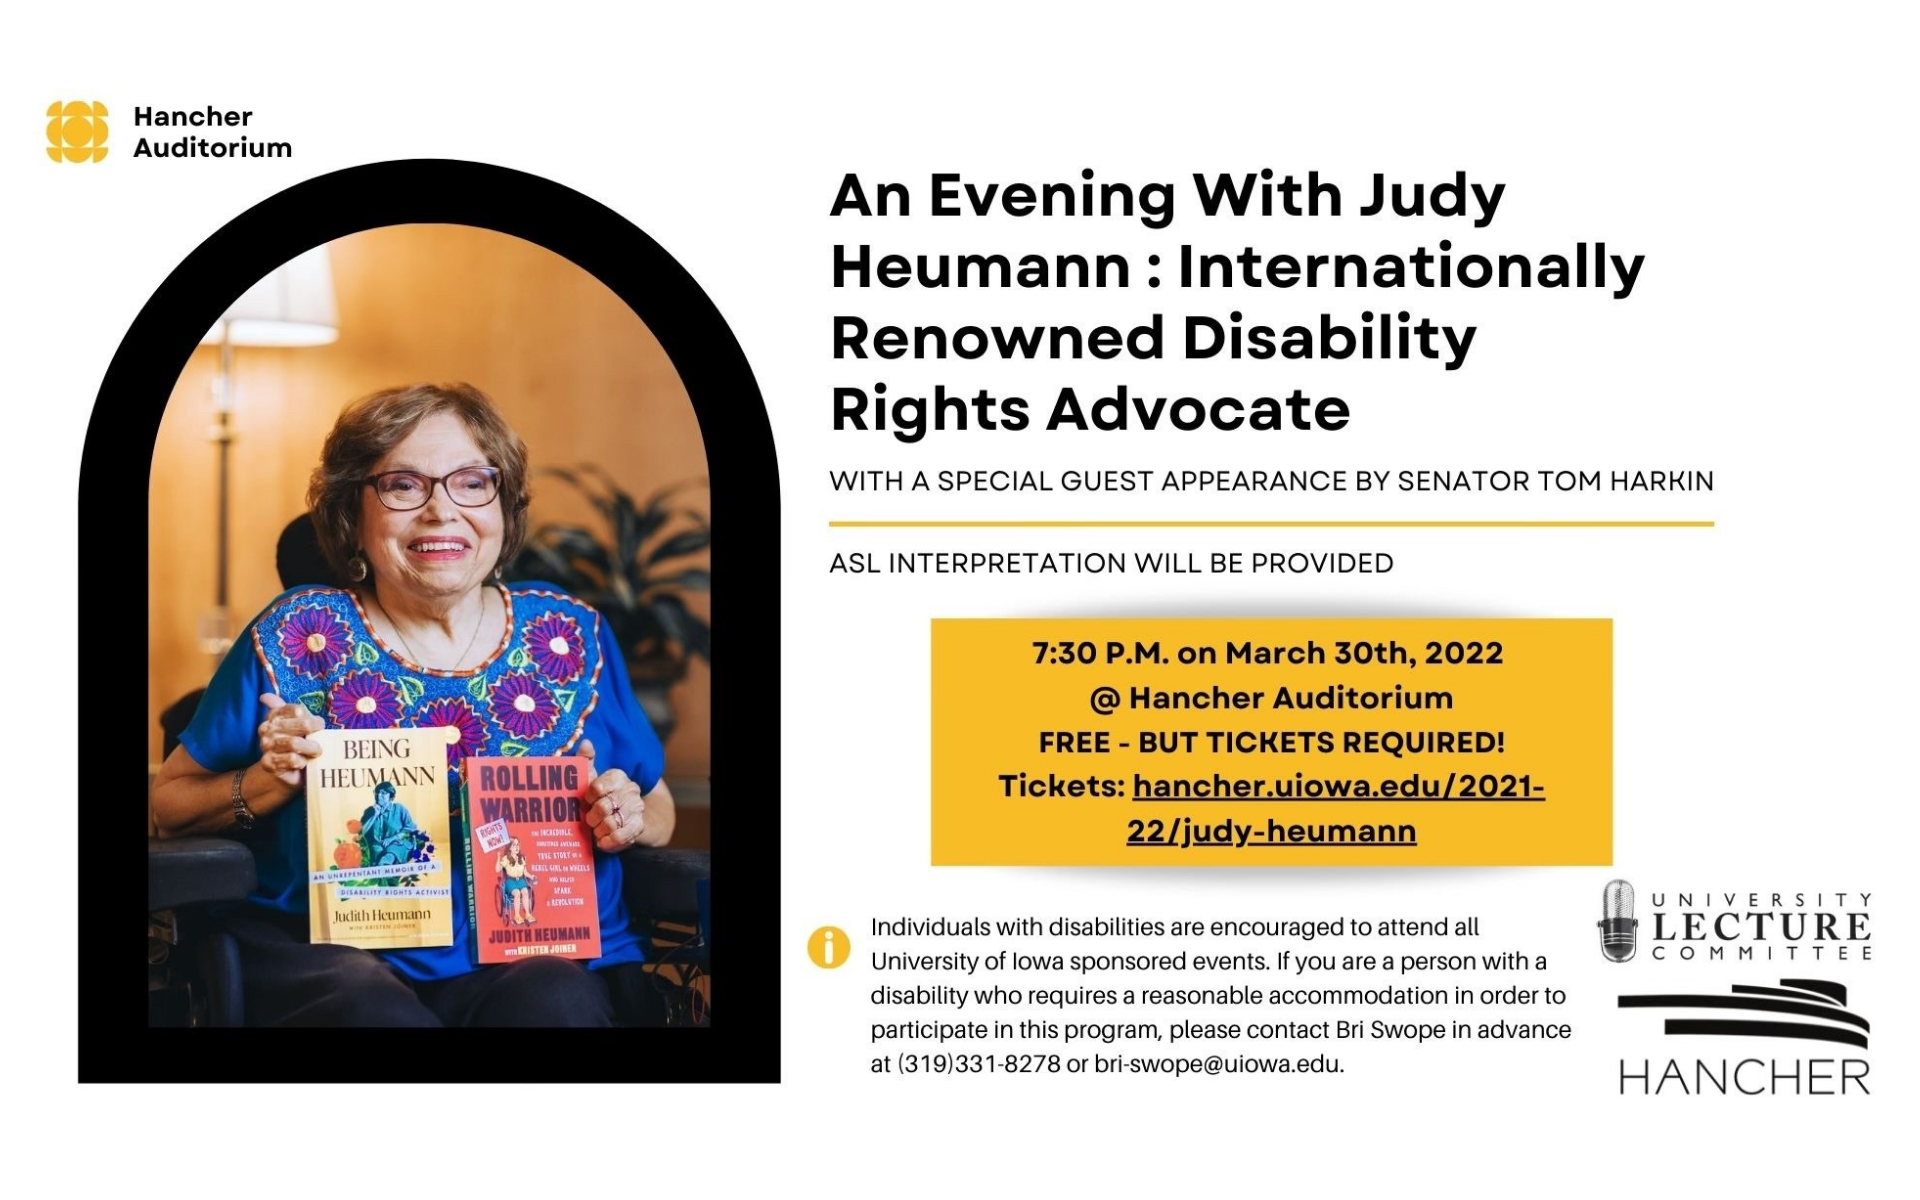 Judy Heumann, Disability Rights activist, appearing at Hancher on March 30